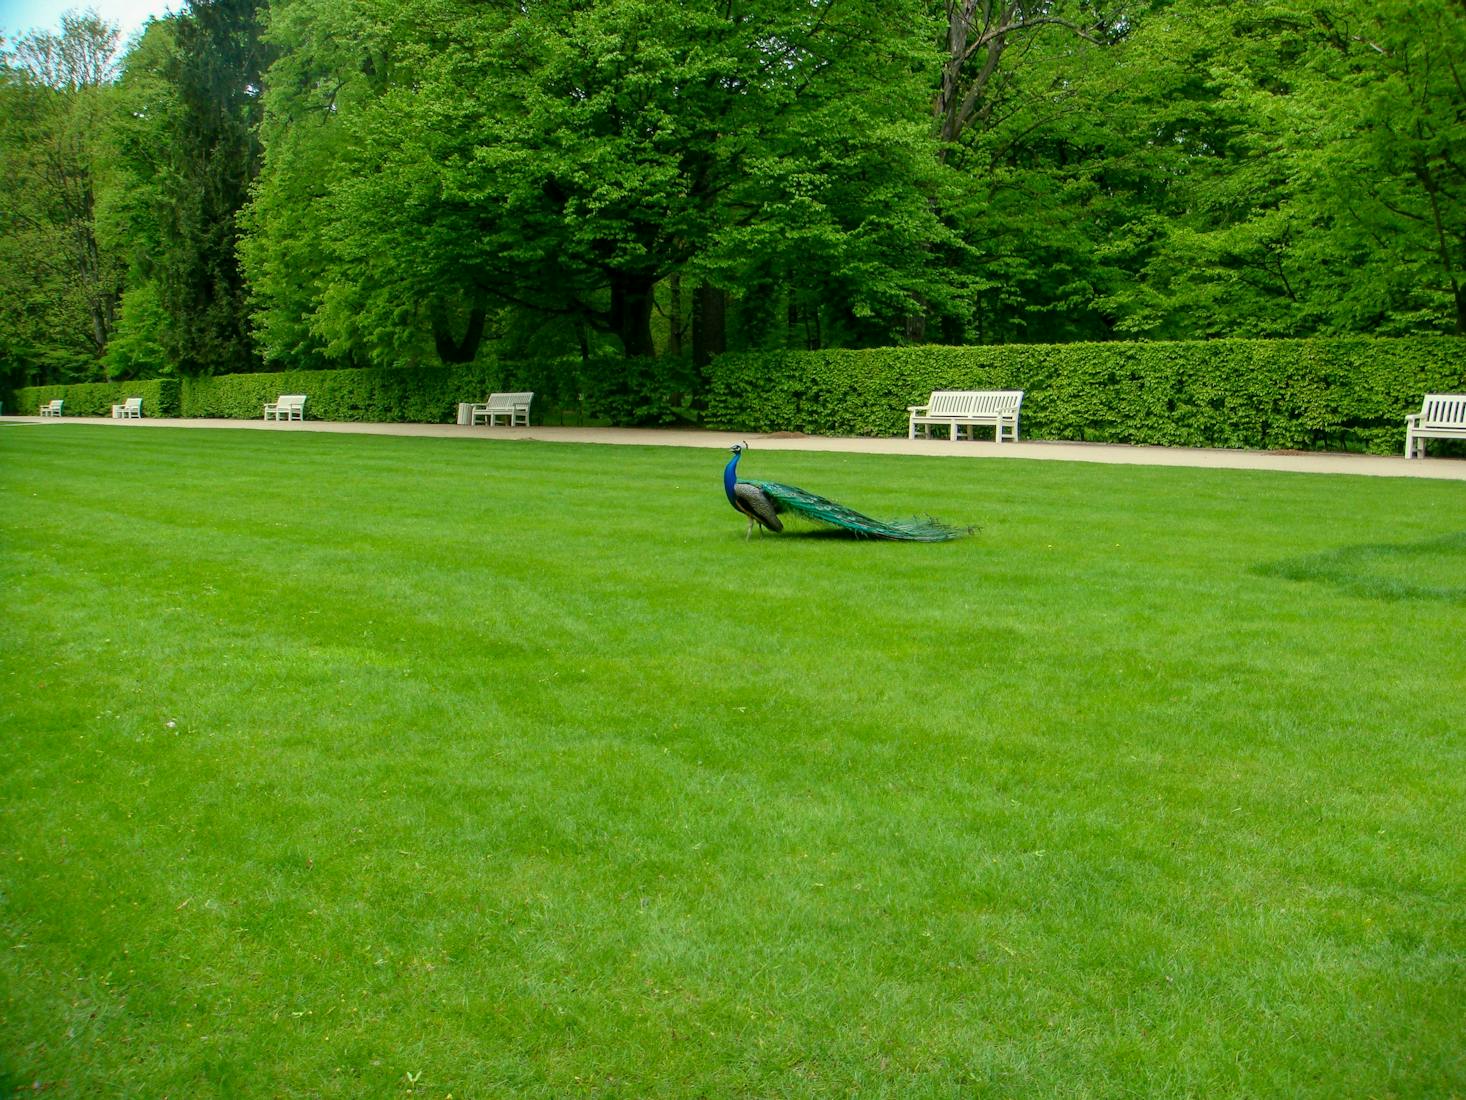 Very green grassy area with a peacock walking, park benches line path behind